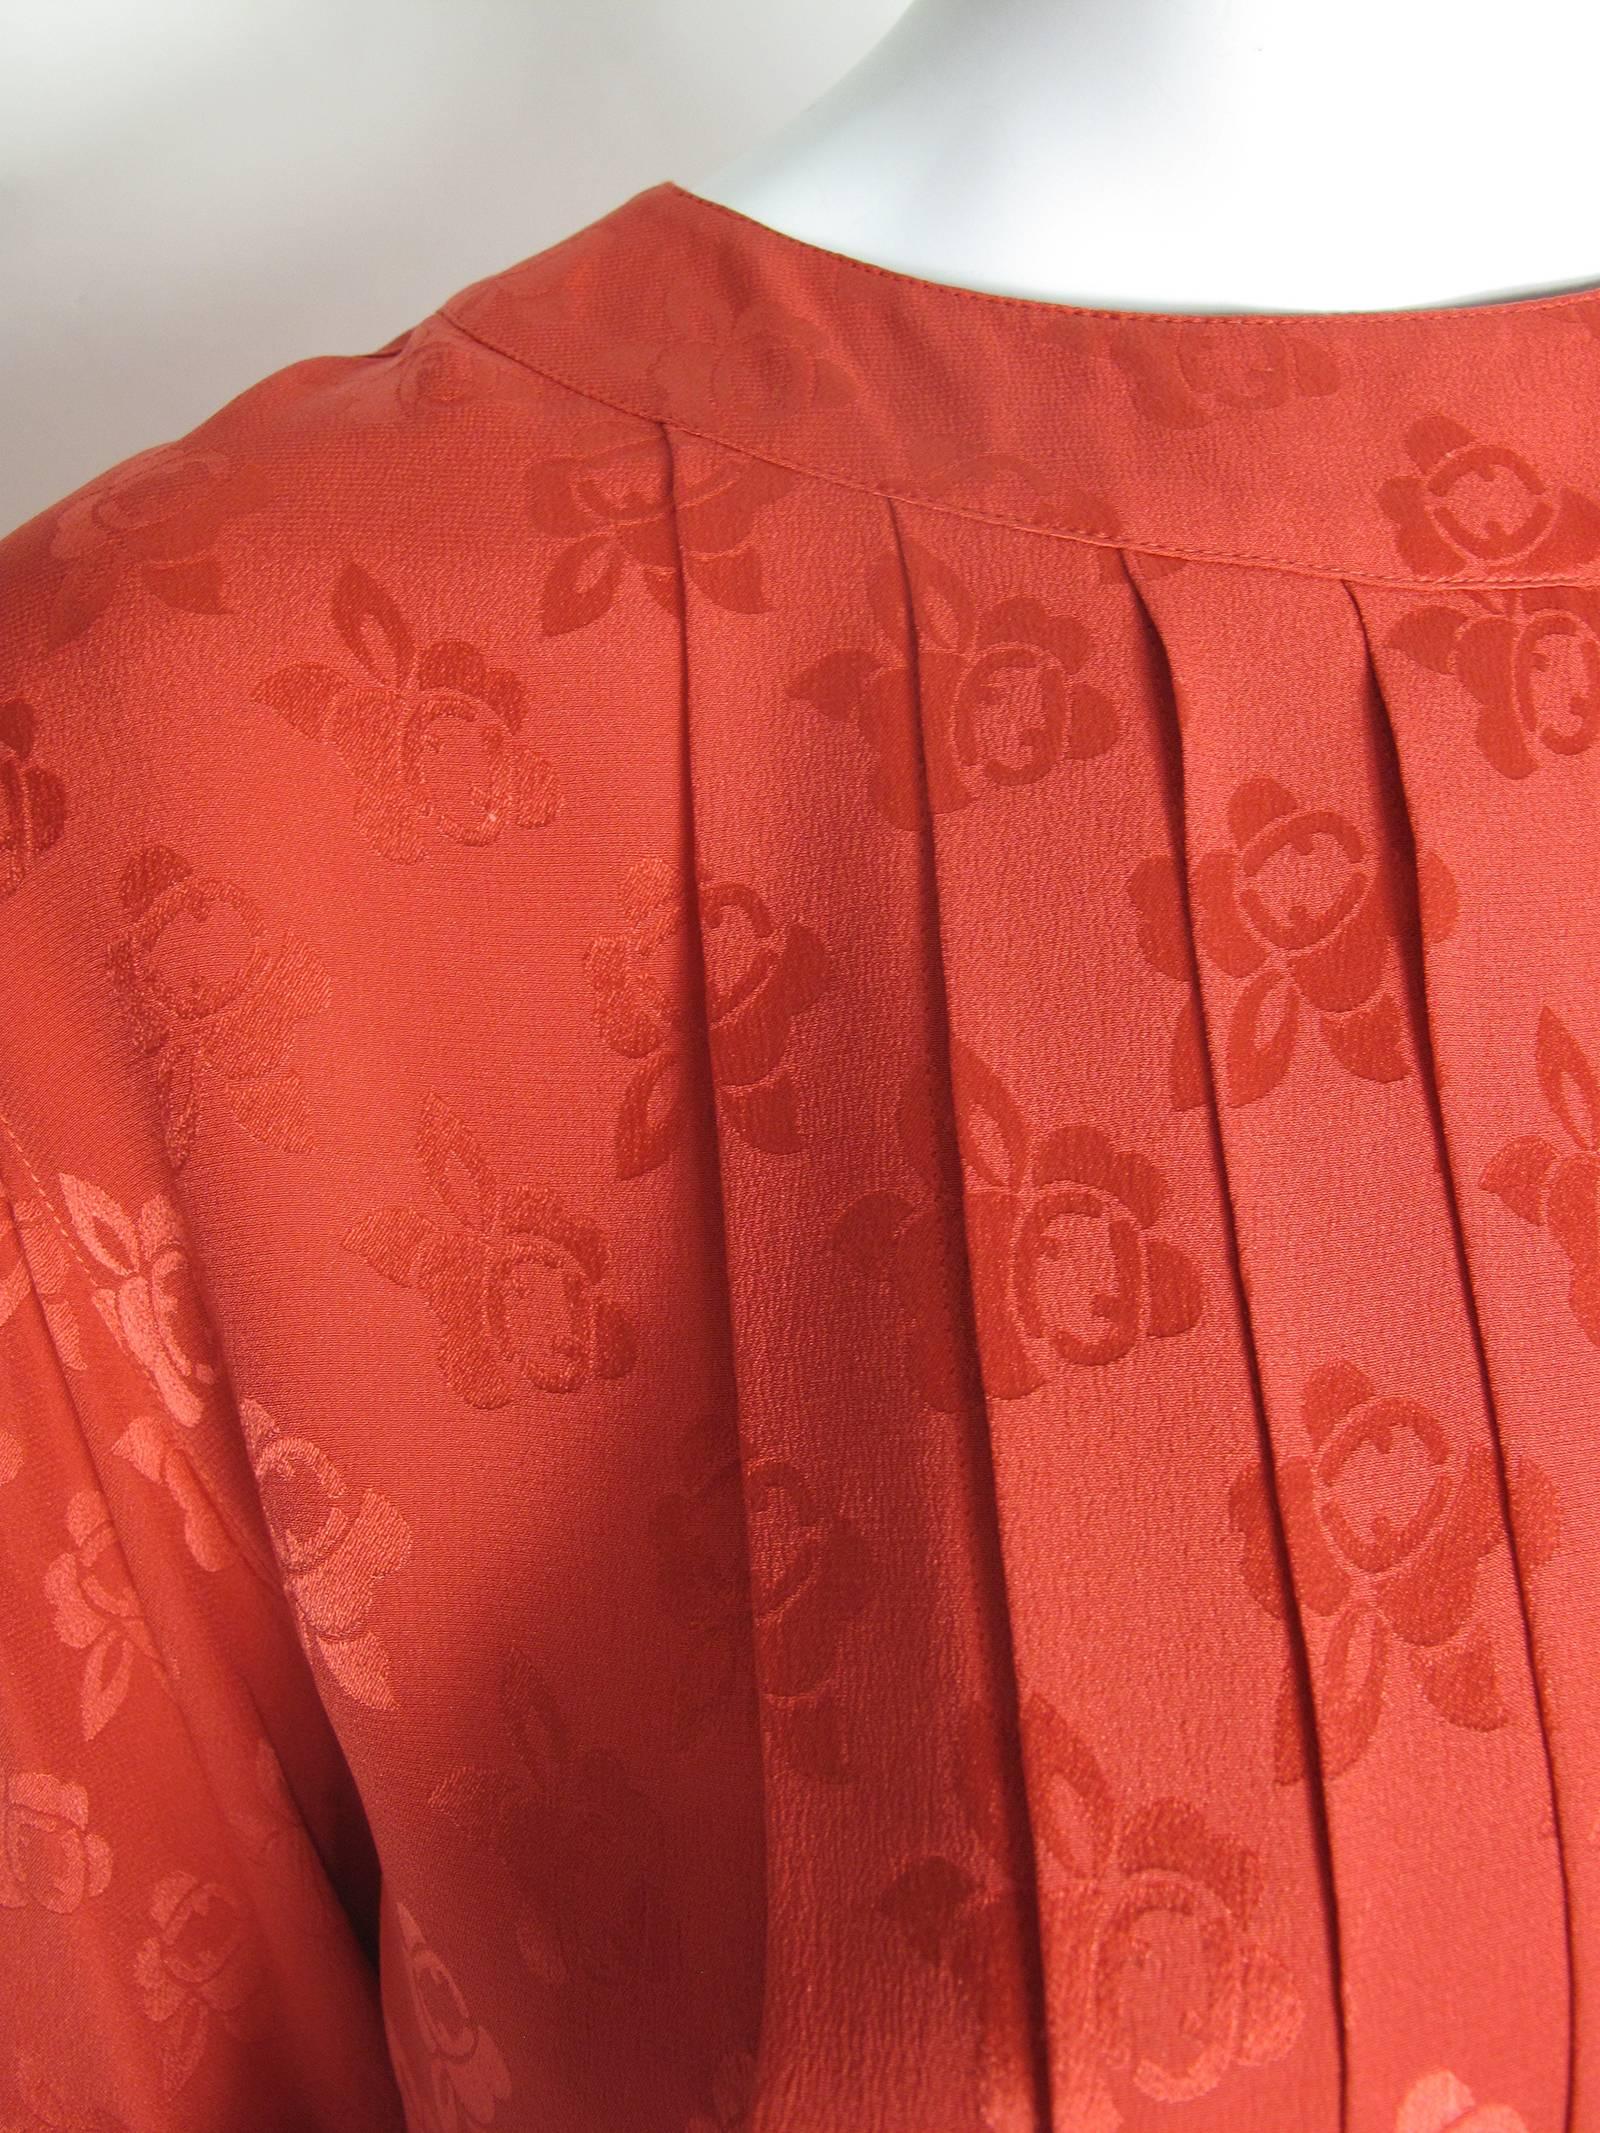 Fendi red silk blouse with pleating.  Condition: Excellent.  Size Medium
We accept returns for refund, please see our terms.  We offer free ground shipping within the US
